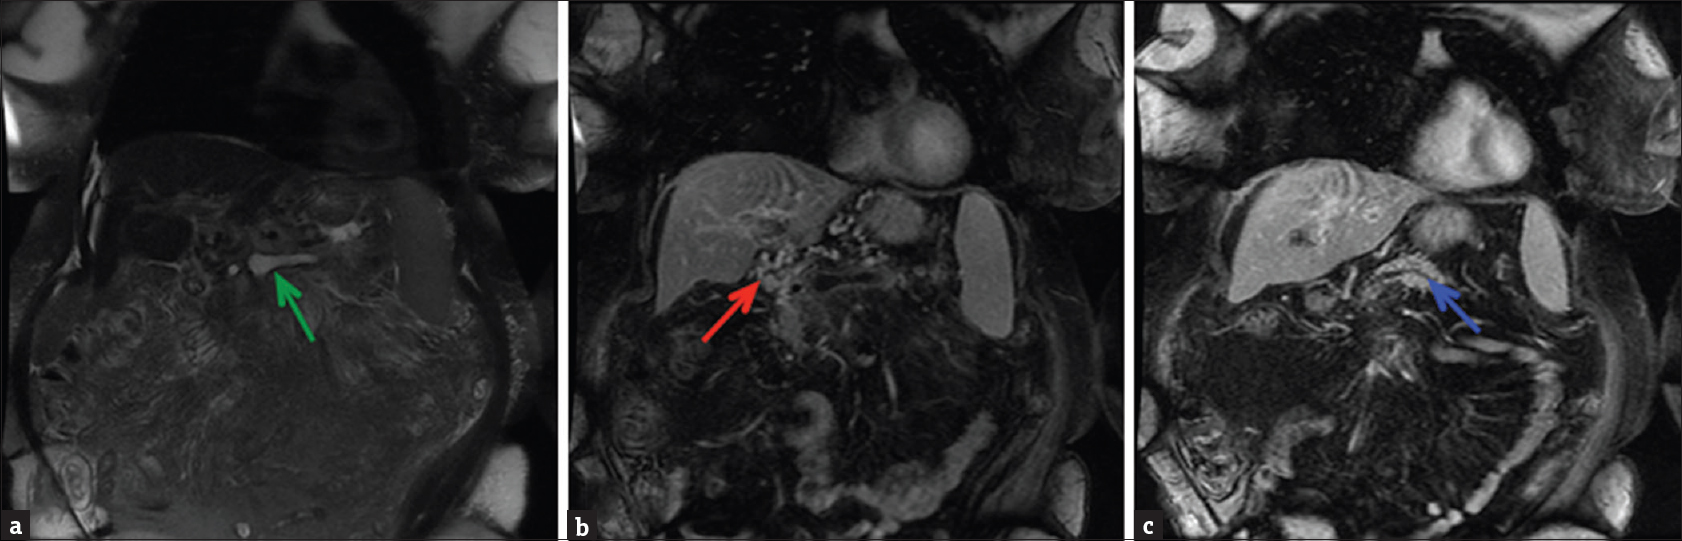 (a) Coronal fat-suppressed T2-weighted image demonstrating hyperintense fluid signal in the splenoportal confluence (green arrow) (b) Coronal fat-suppressed post-contrast T1-weighted image demonstrating nonenhancement of the portal venous confluence, consistent with thrombosis. Numerous enhancing collaterals (red arrow) are present in the porta hepatis region confirming the chronic nature of the thrombus and cavernous transformation of the portal vein. (c) A more posterior coronal fat-suppressed postcontrast T1-weighted image revealing a prominent pancreatic duct (blue arrow).